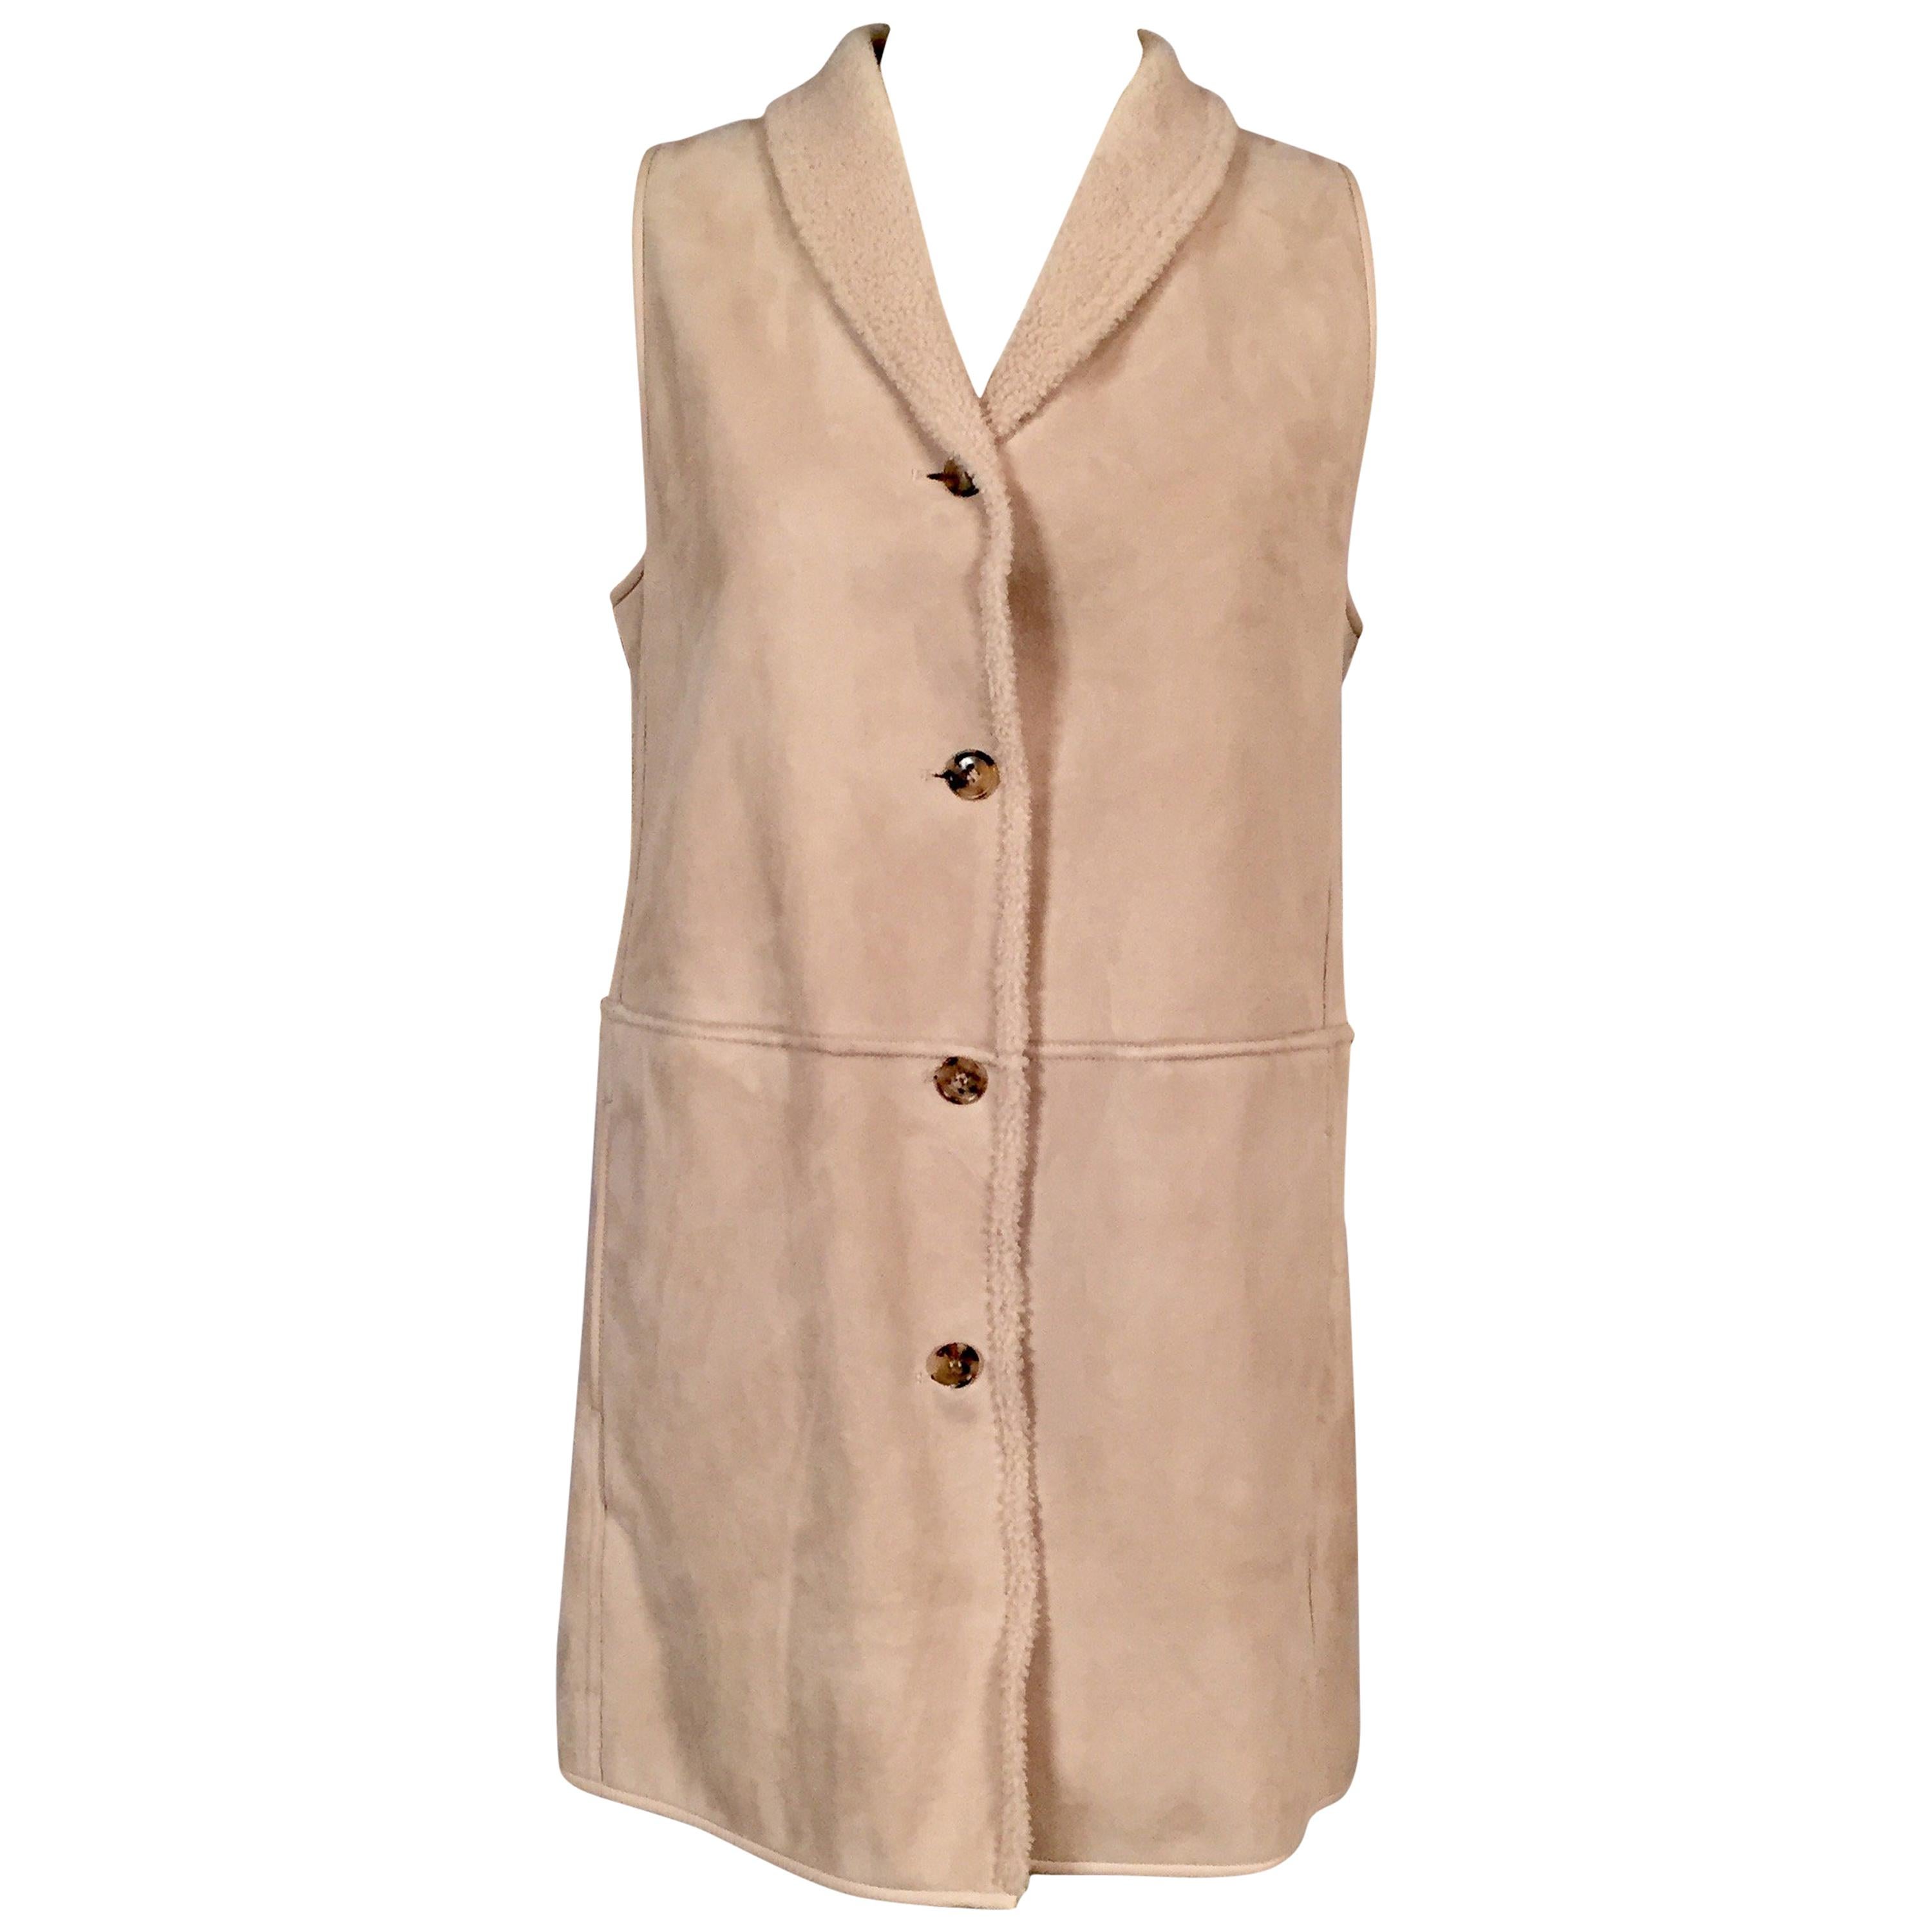 Loro Piana Light Weight Beige Shearling Vest Jacket Larger Size For Sale